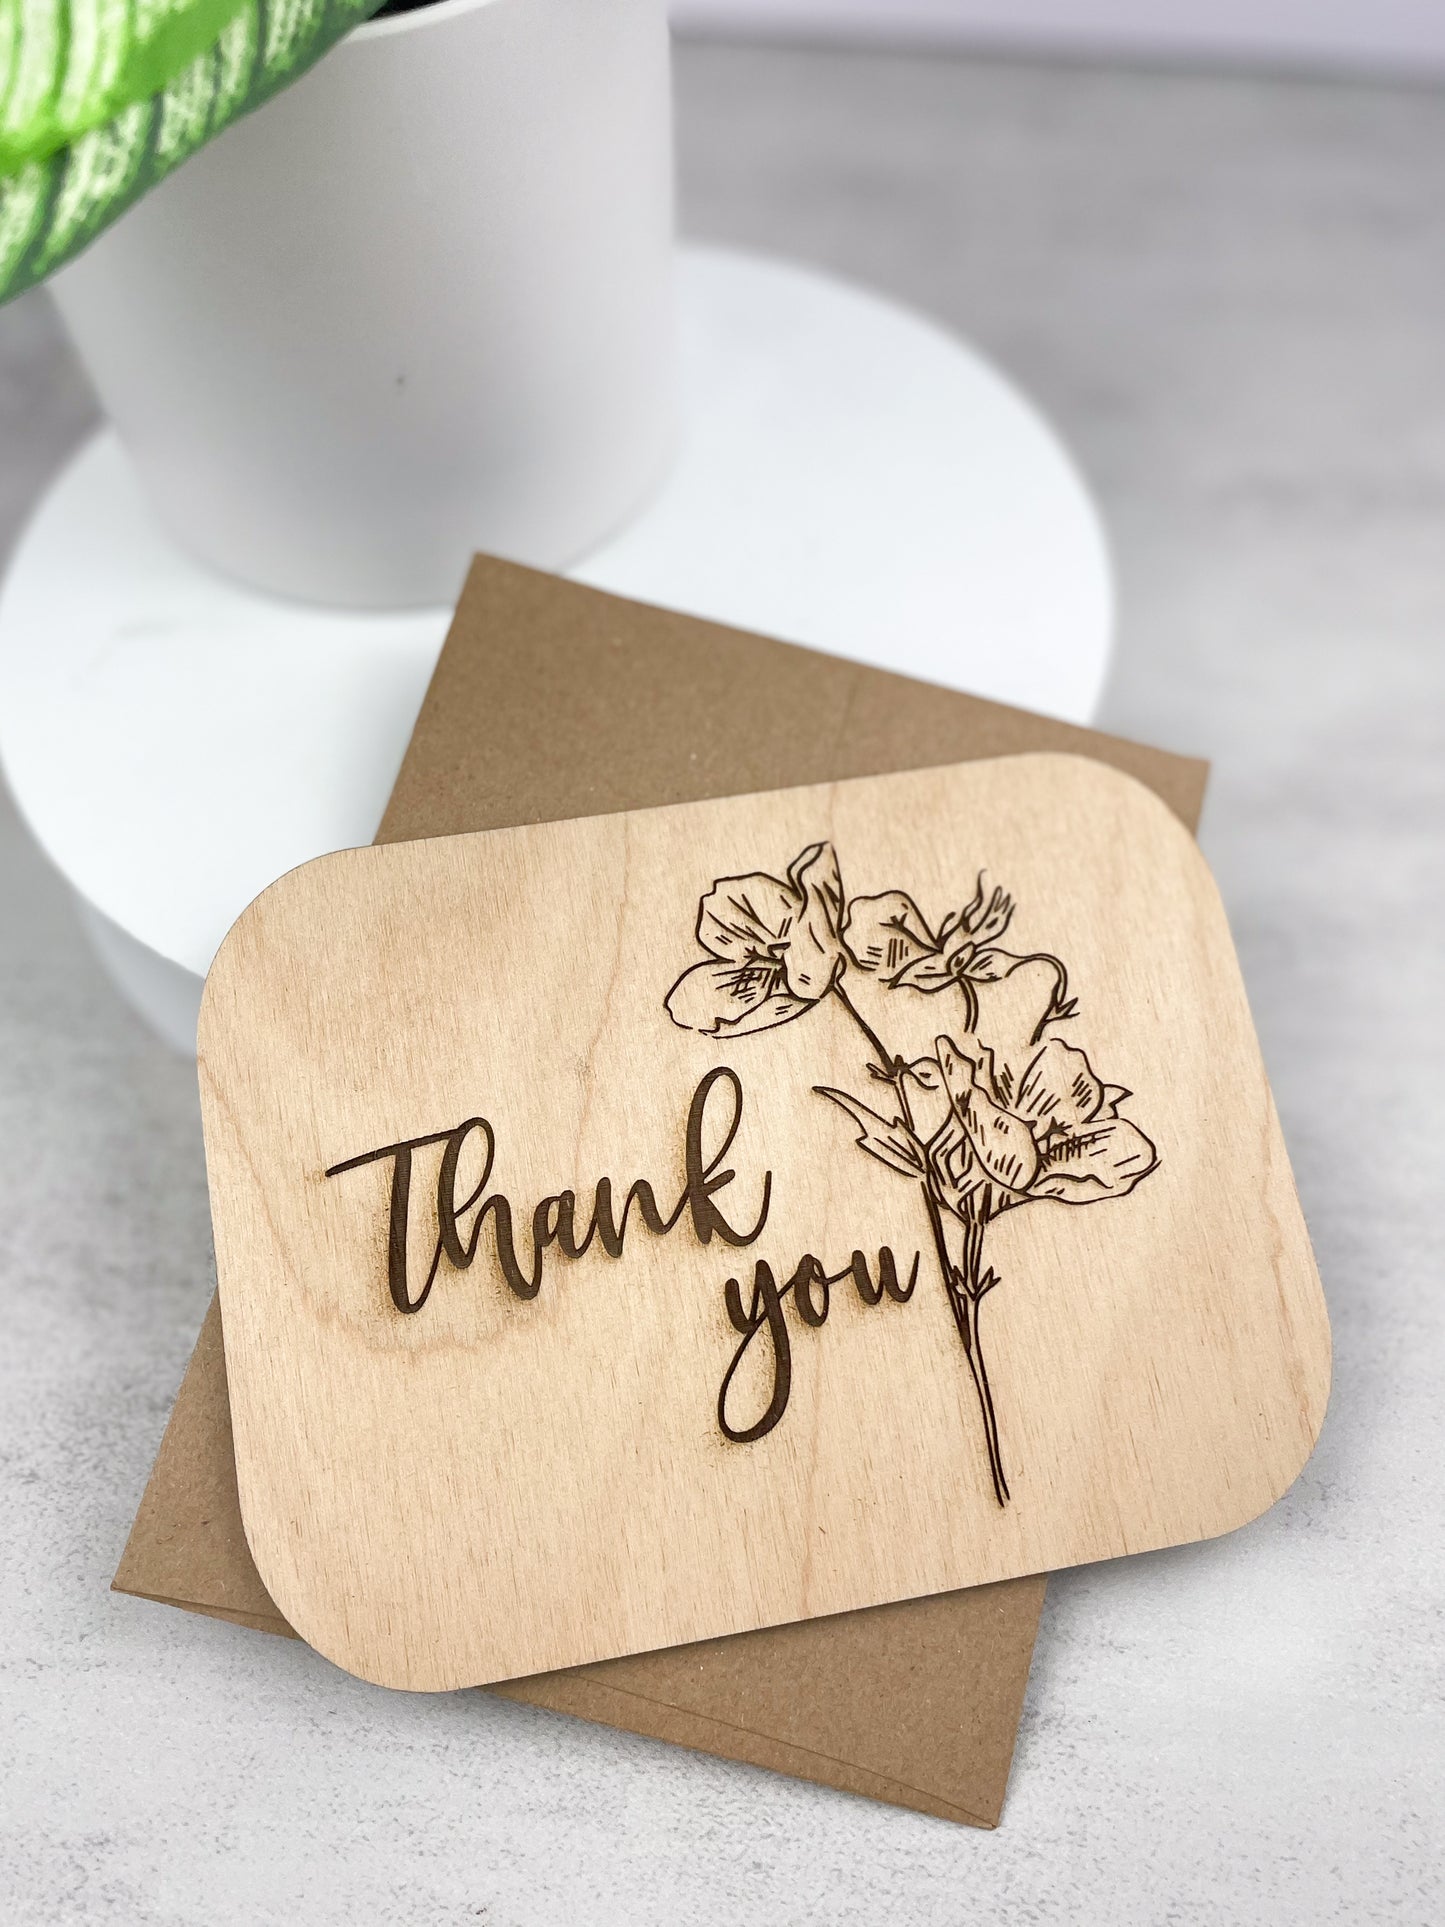 Wooden Greeting Card: Thank You